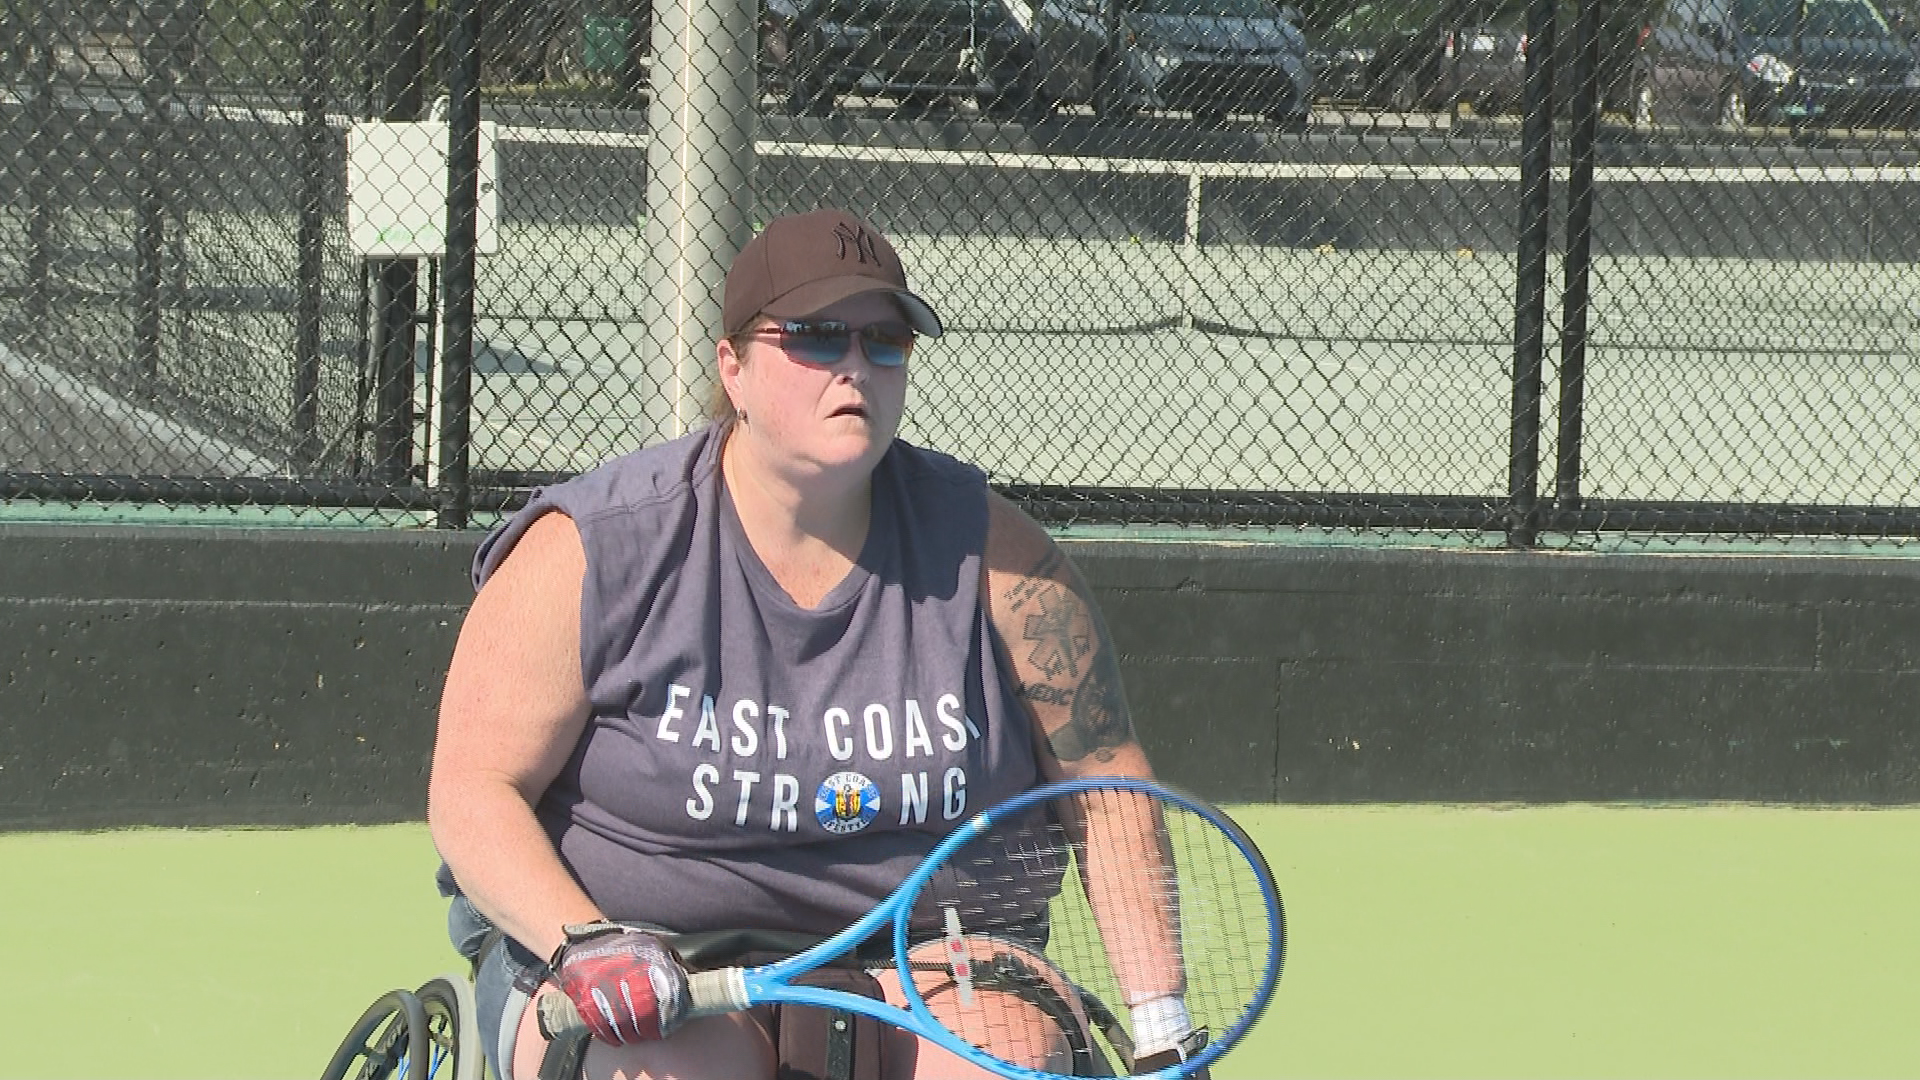 Denise Fitzgerald has been playing wheelchair tennis for a few years.